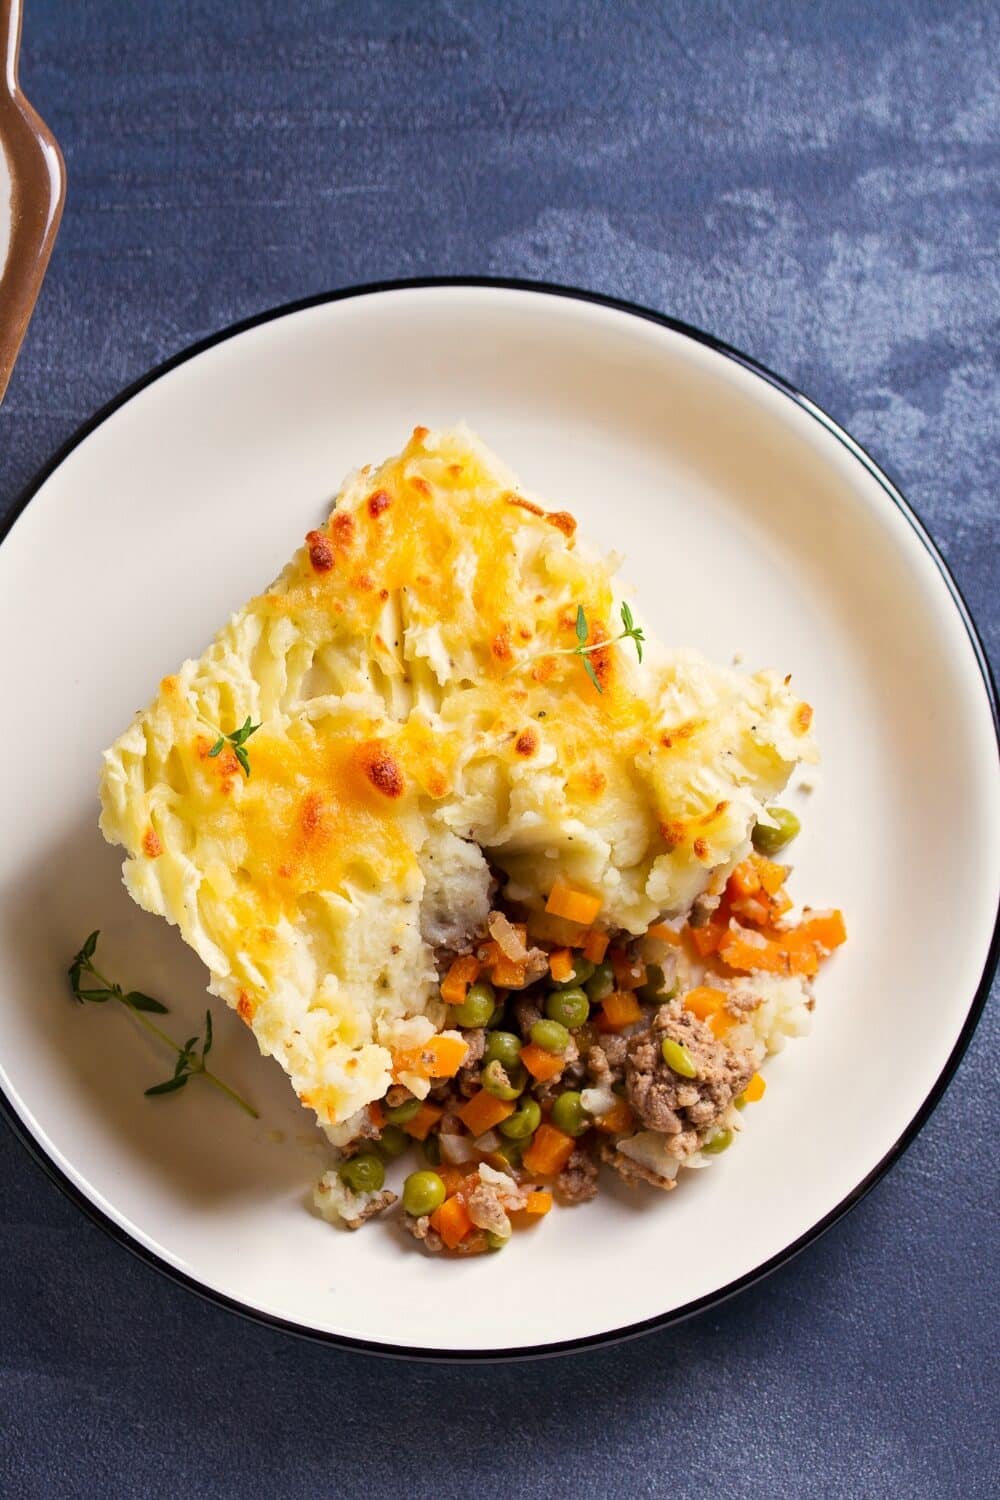 Keto cottage pie featuring a luscious filling of seasoned ground meat and vegetables, topped with a smooth layer of creamy cauliflower mash. The golden-brown topping offers a comforting contrast to the savory, hearty base. This low-carb twist on a traditional favorite delivers both flavor and indulgence while adhering to a keto lifestyle.